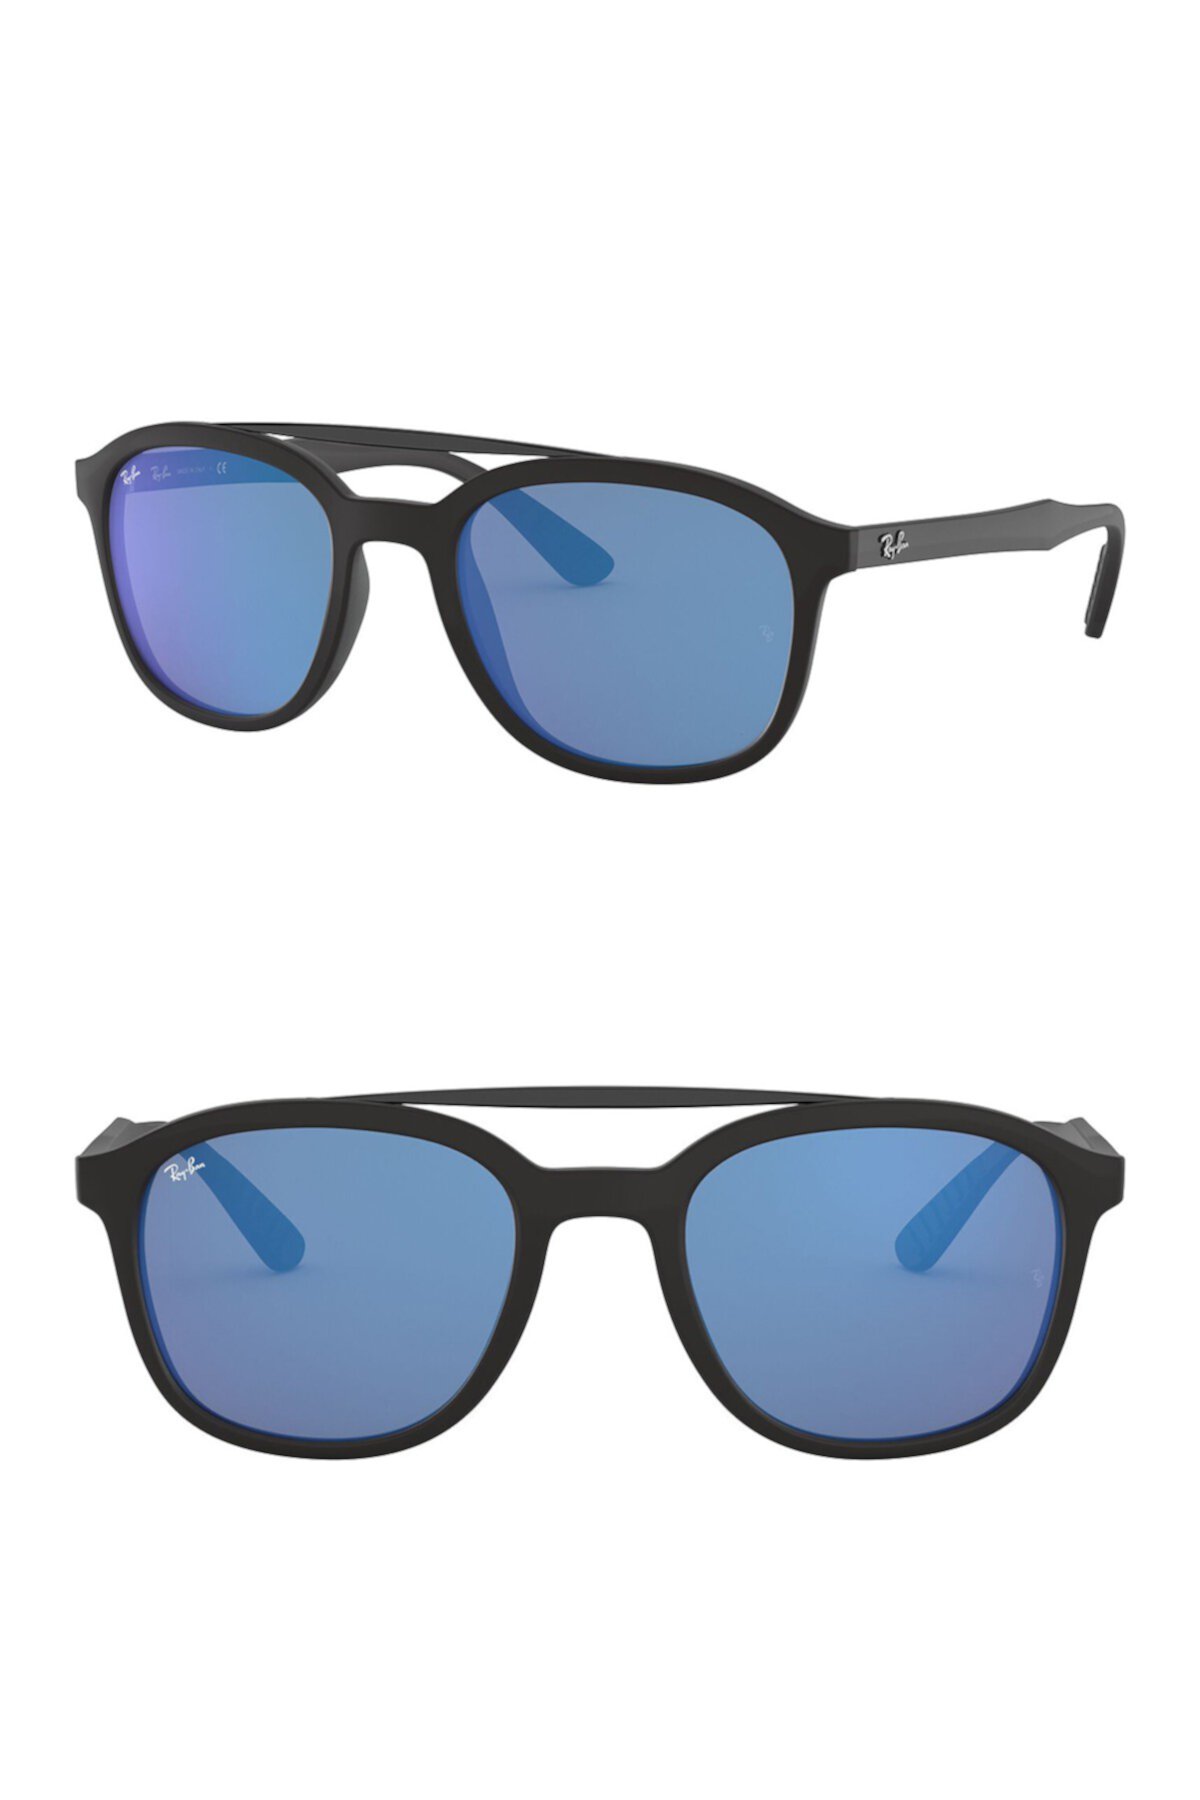 Active Lifestyle 53mm Square Sunglasses Ray-Ban